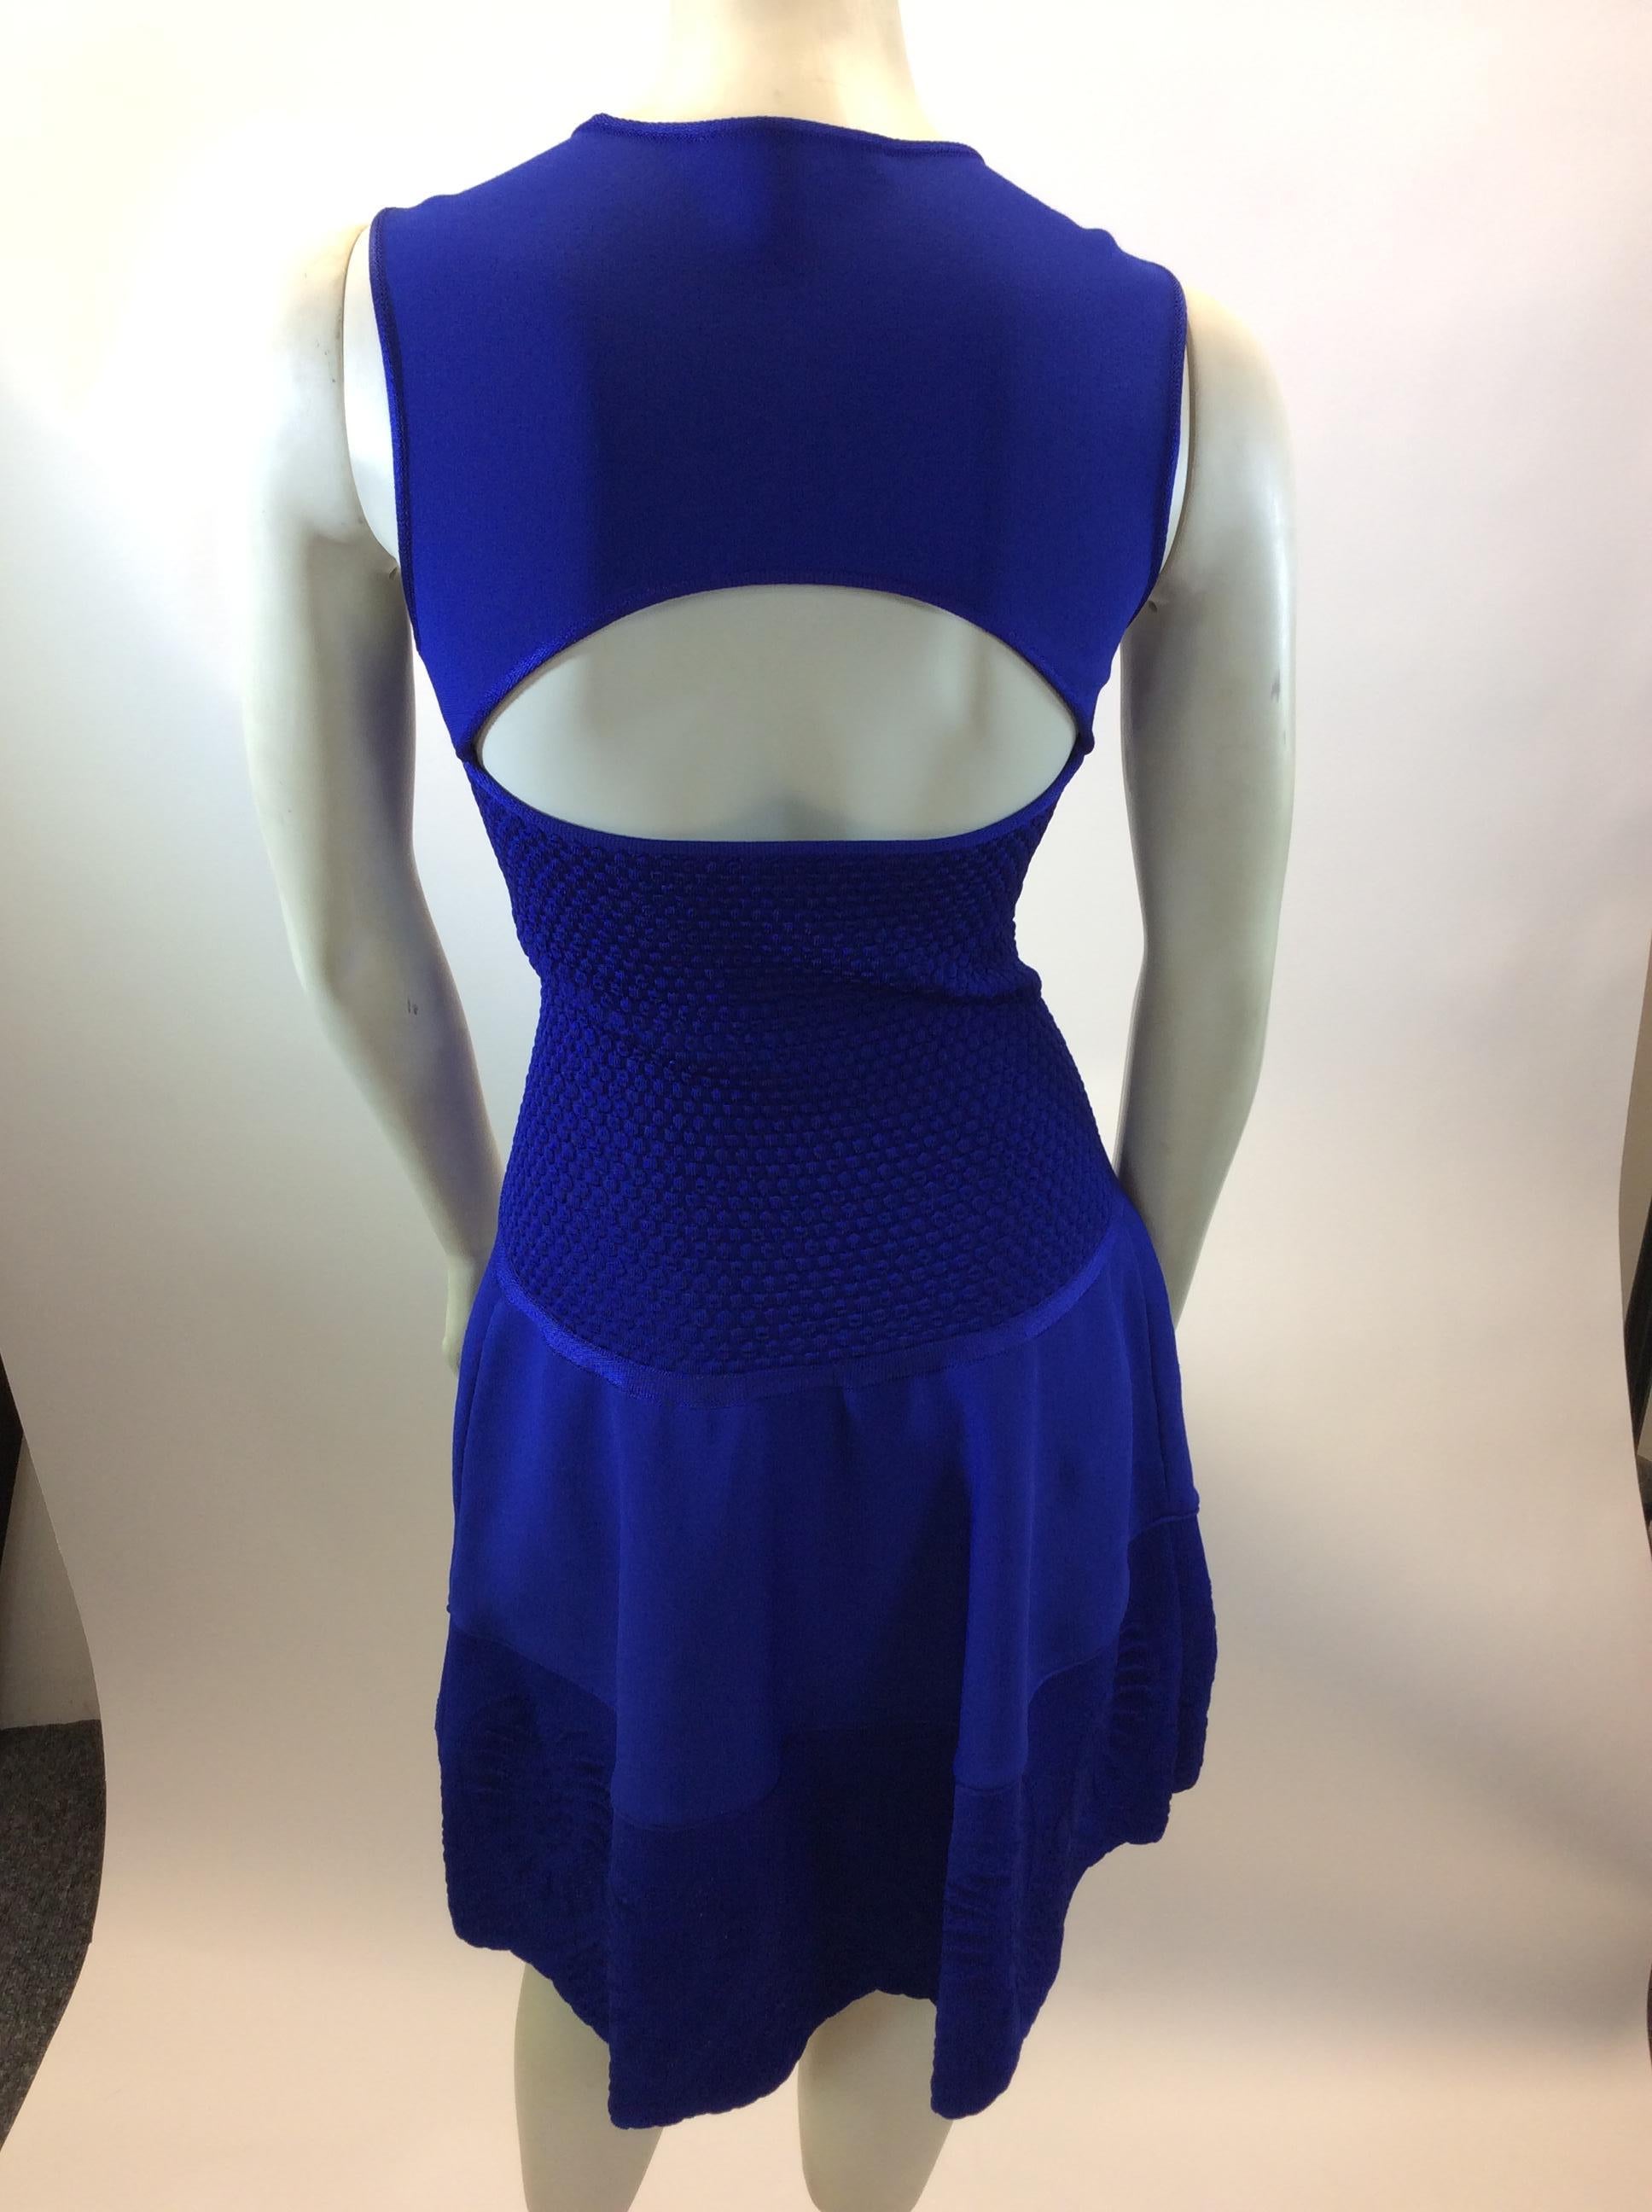 Roberto Cavalli Royal Blue Sleeveless Dress In Good Condition For Sale In Narberth, PA